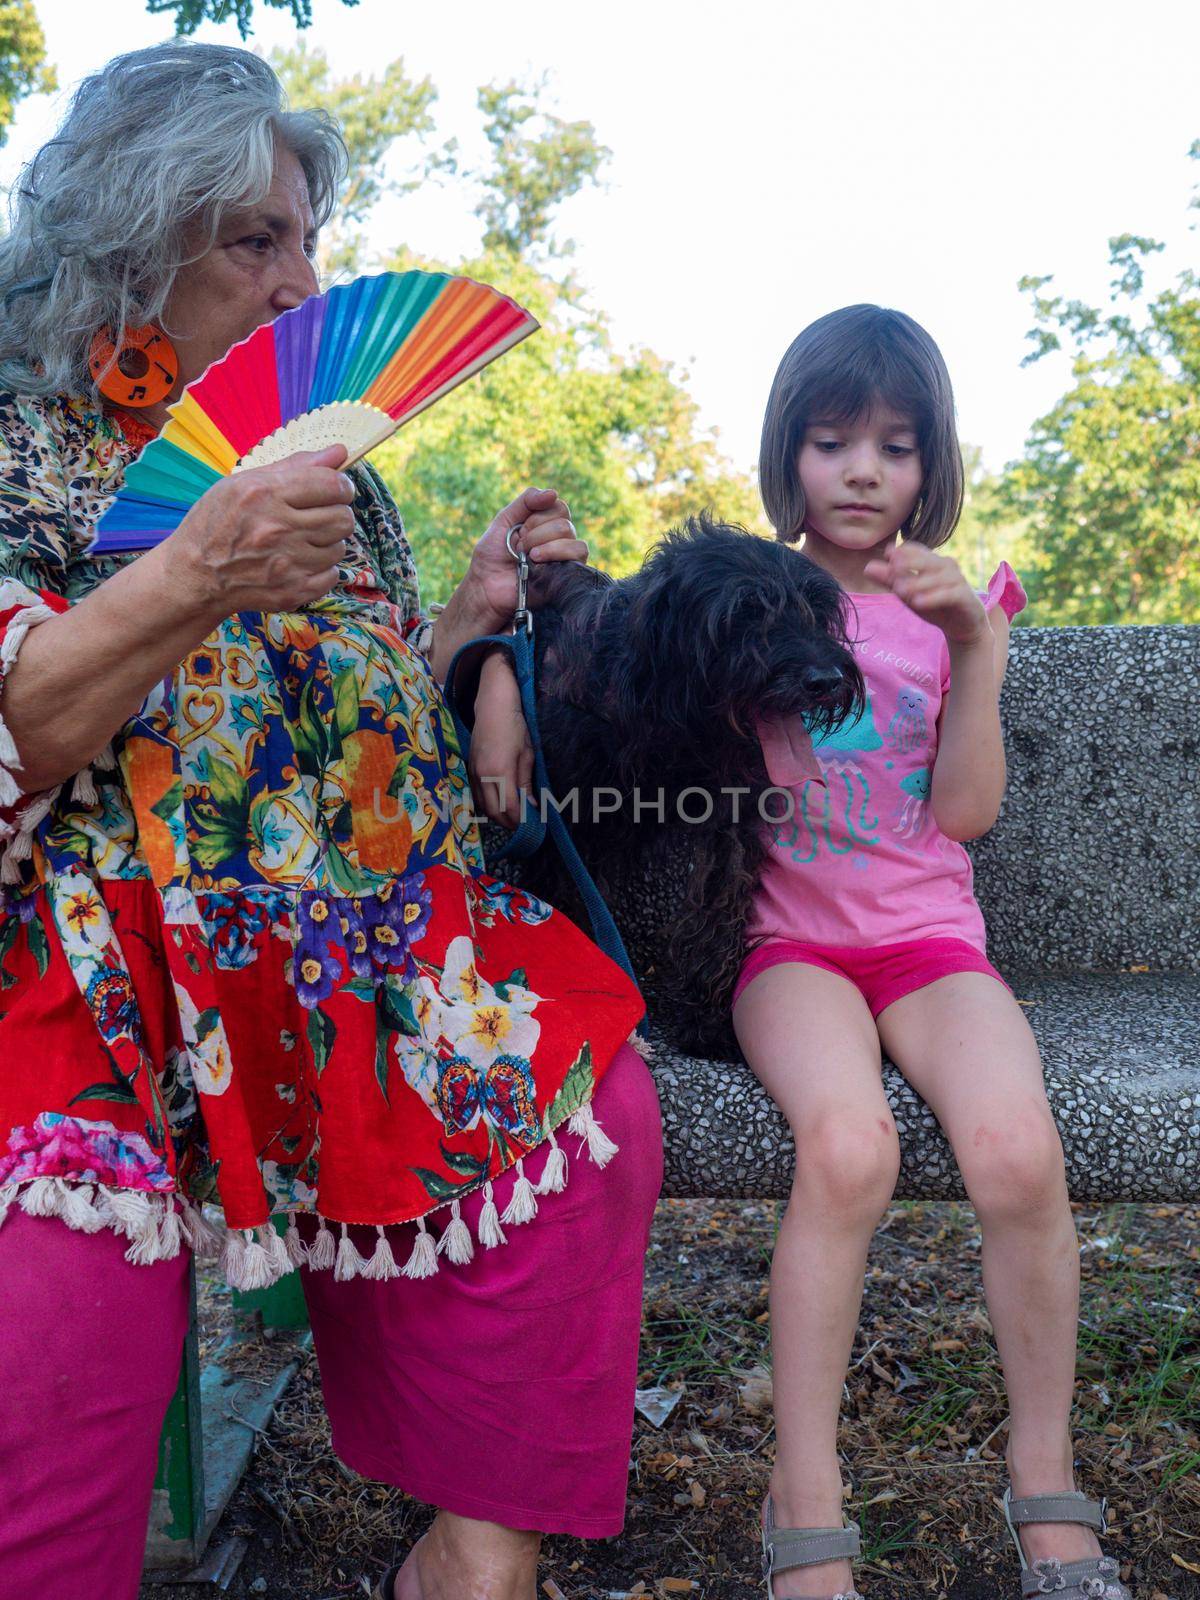 Trendy senior lady and her little grand daughter enjoying a park with their terrier dog - Grandmother and granddaughter happy together a sunny day